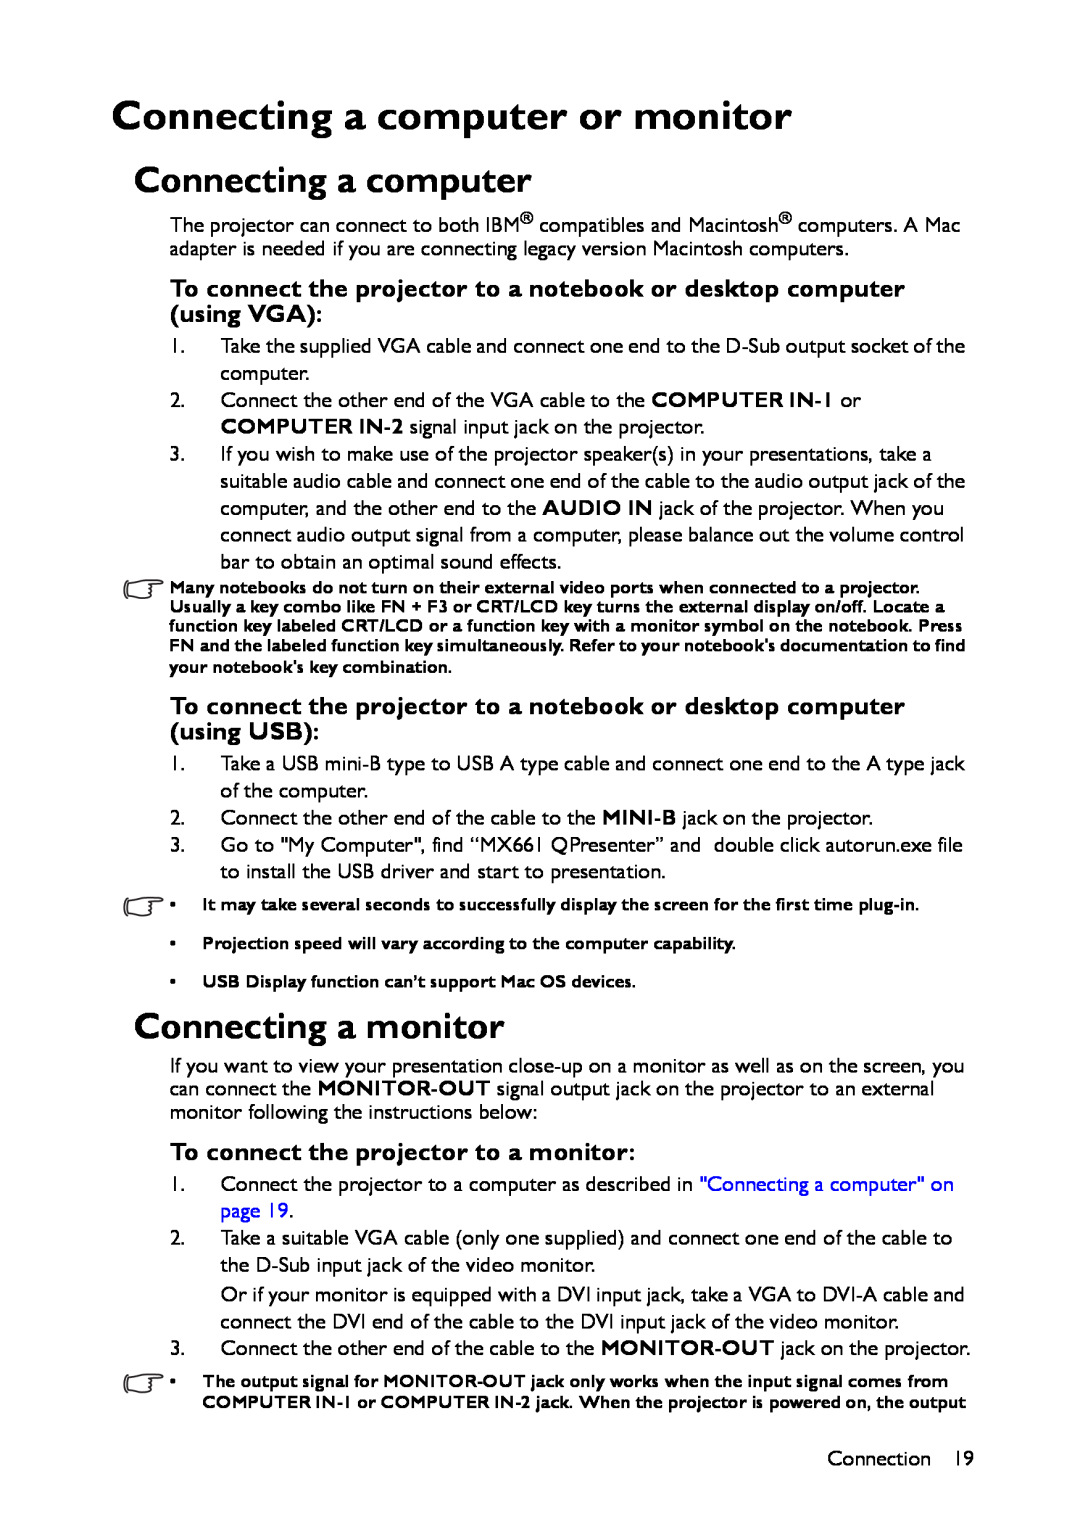 BenQ MX661 user manual Connecting a computer or monitor, Connecting a monitor, To connect the projector to a monitor 